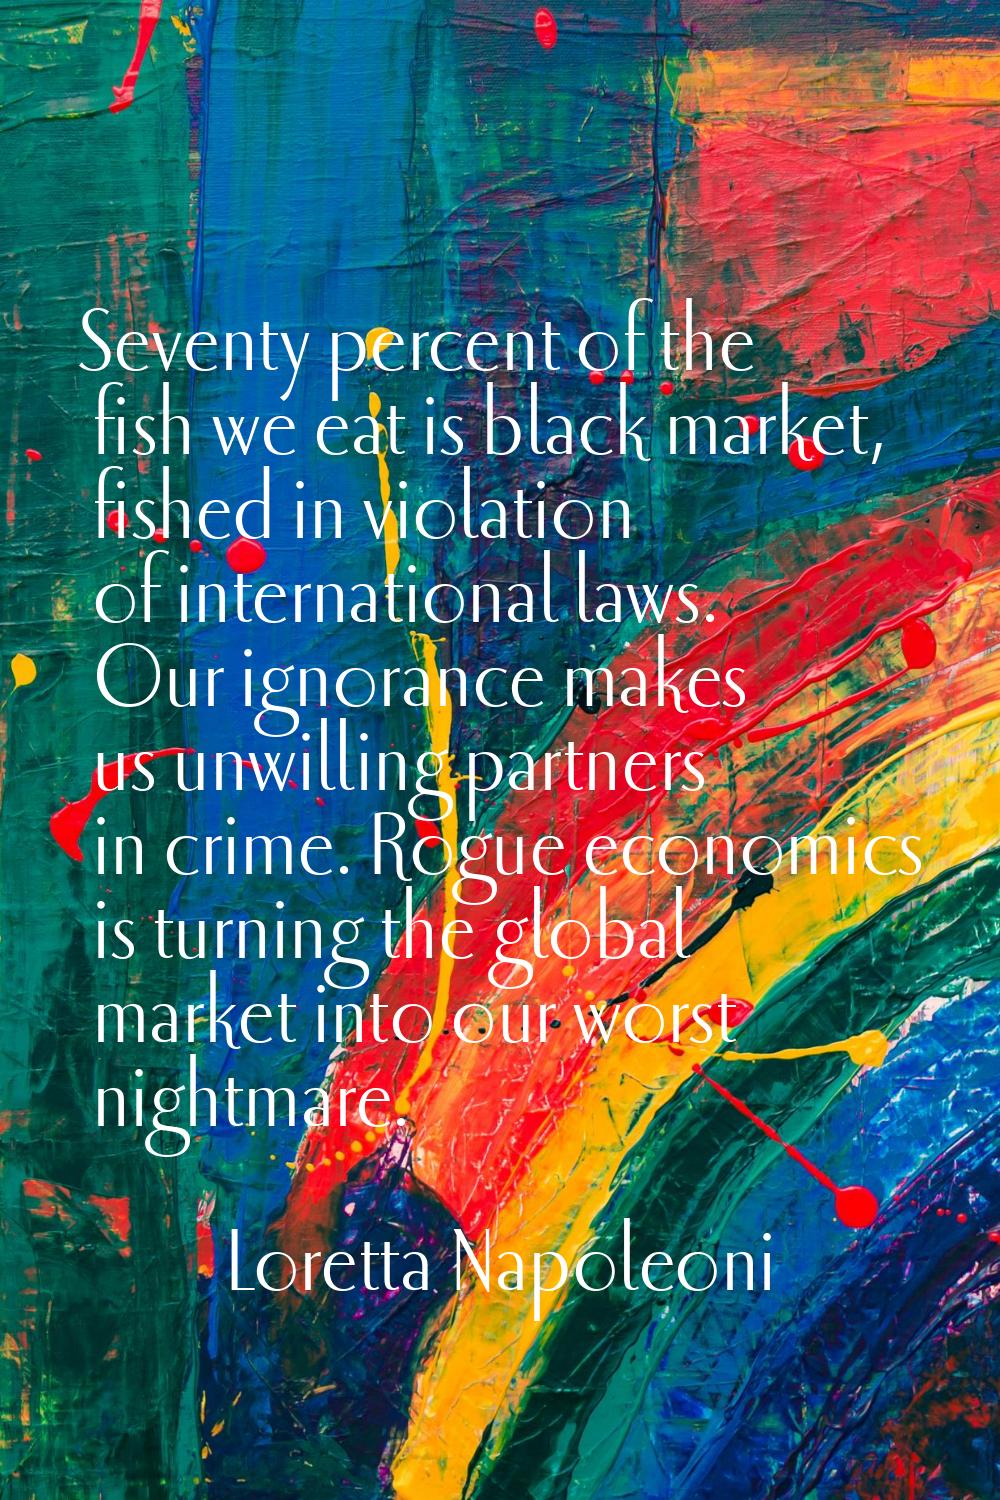 Seventy percent of the fish we eat is black market, fished in violation of international laws. Our 